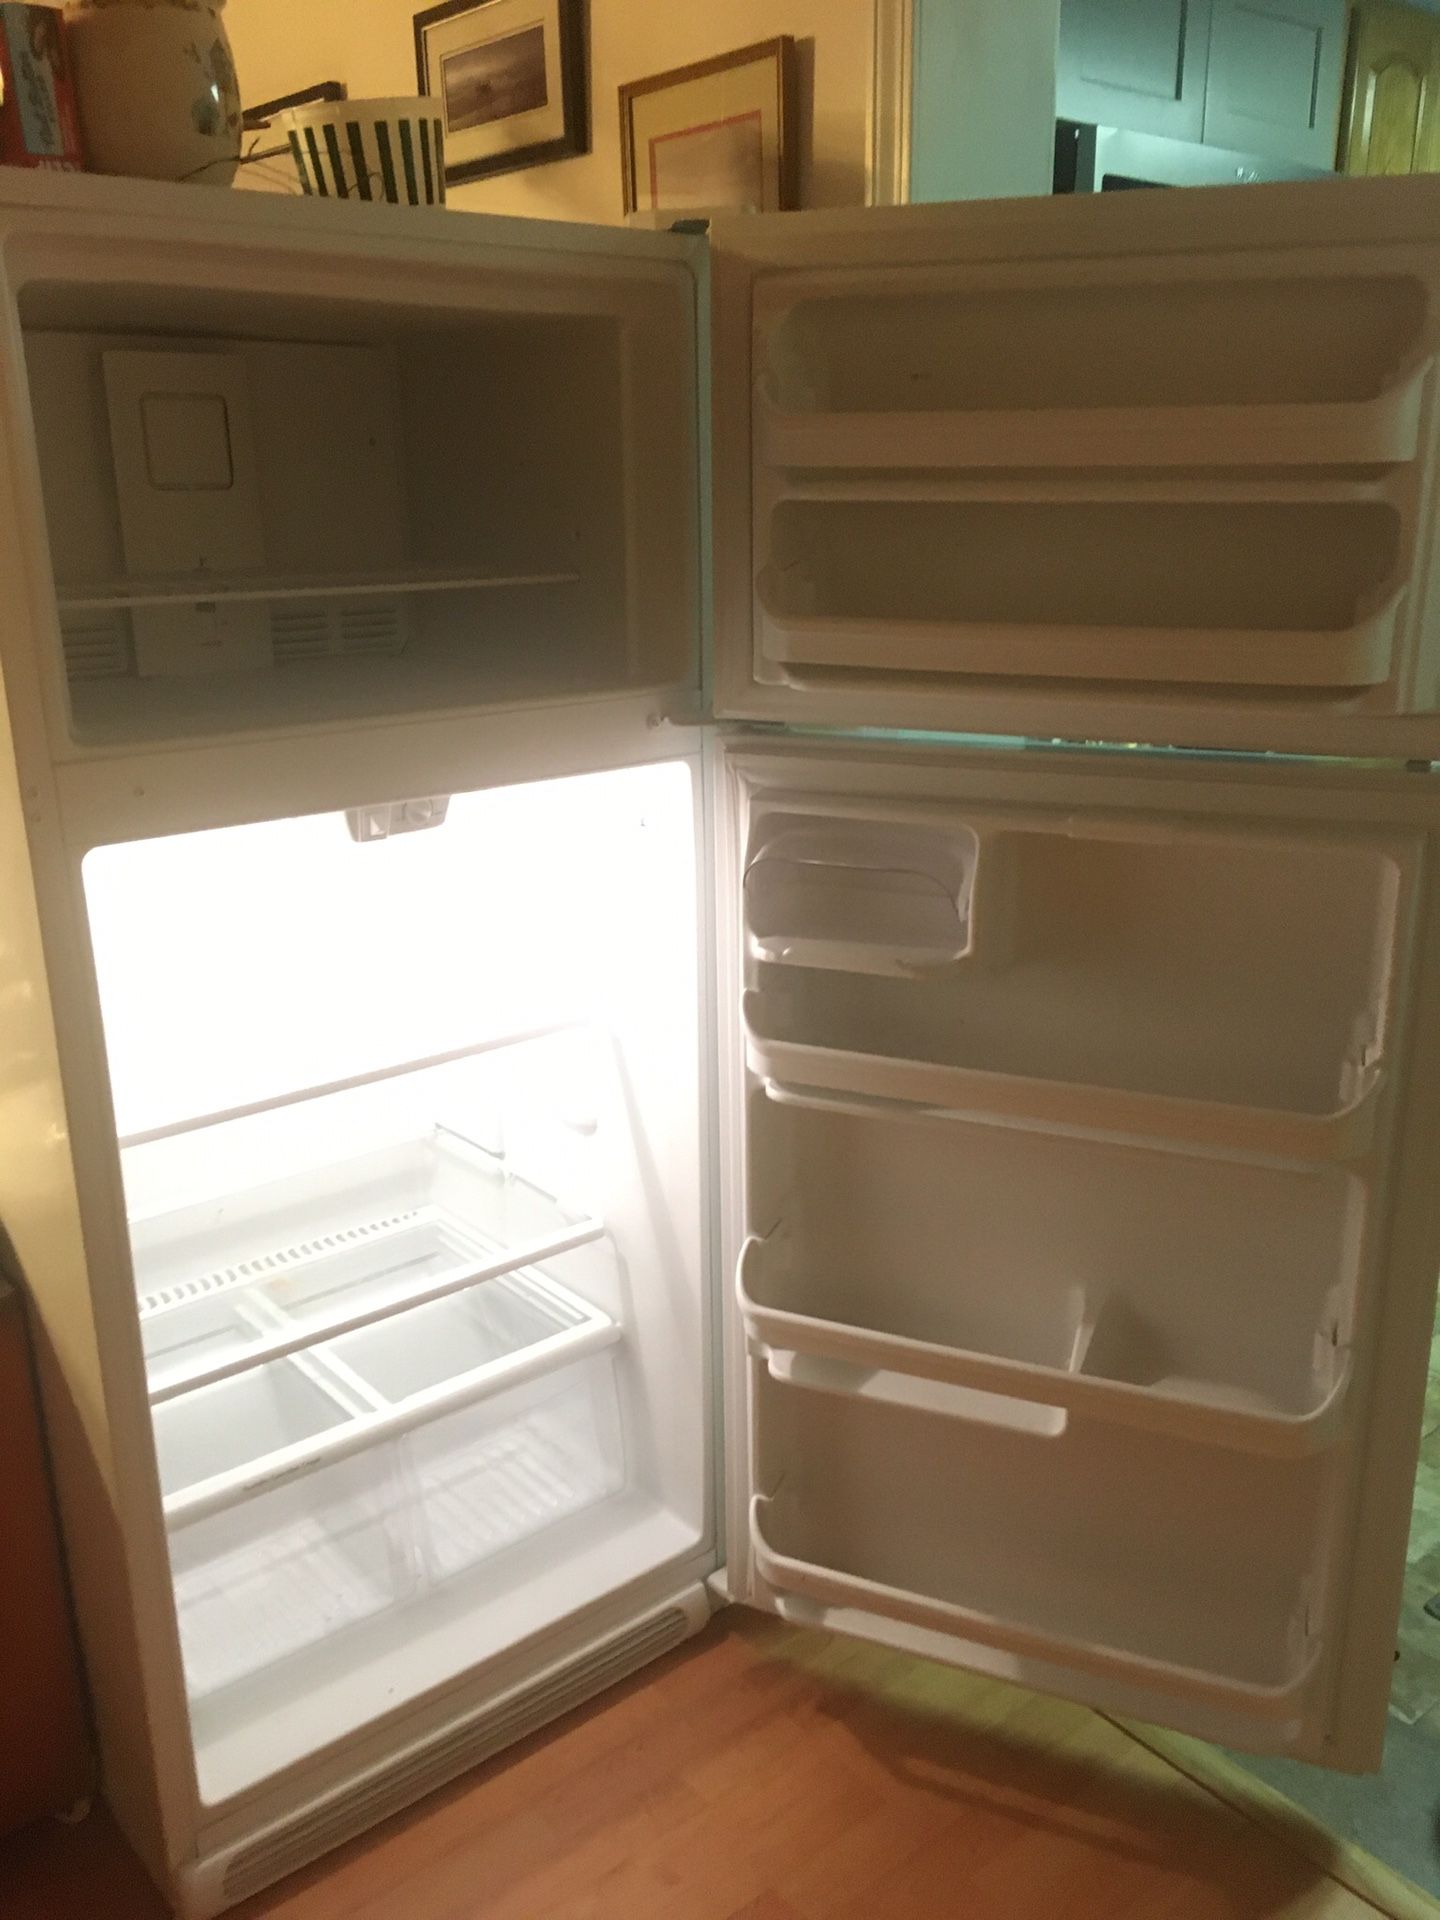 MUST SELL NOW. KENMORE Refrigerator,